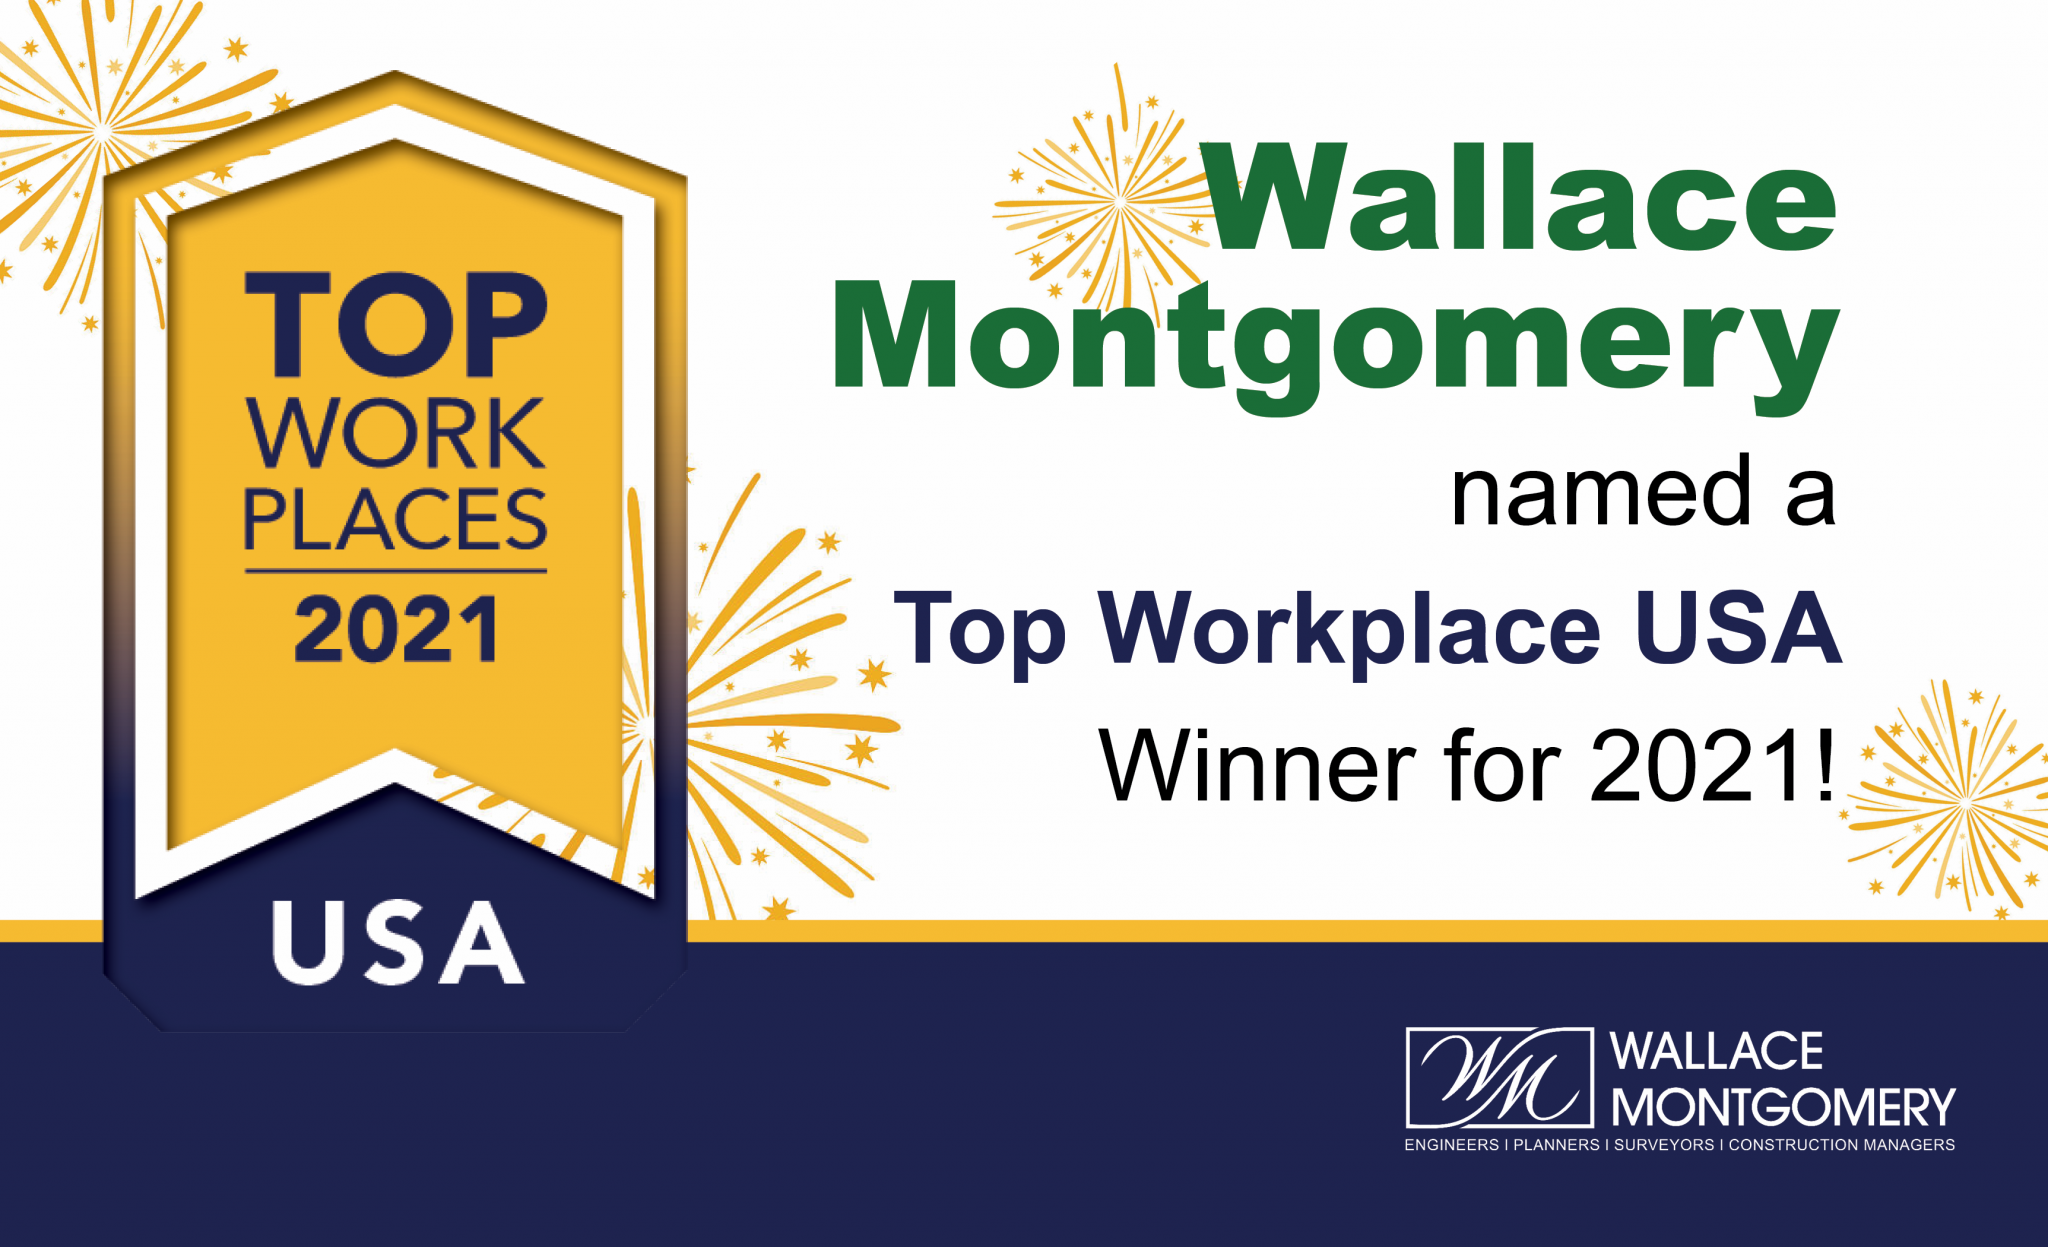 WM named Top Workplace USA winner Wallace Montgomery